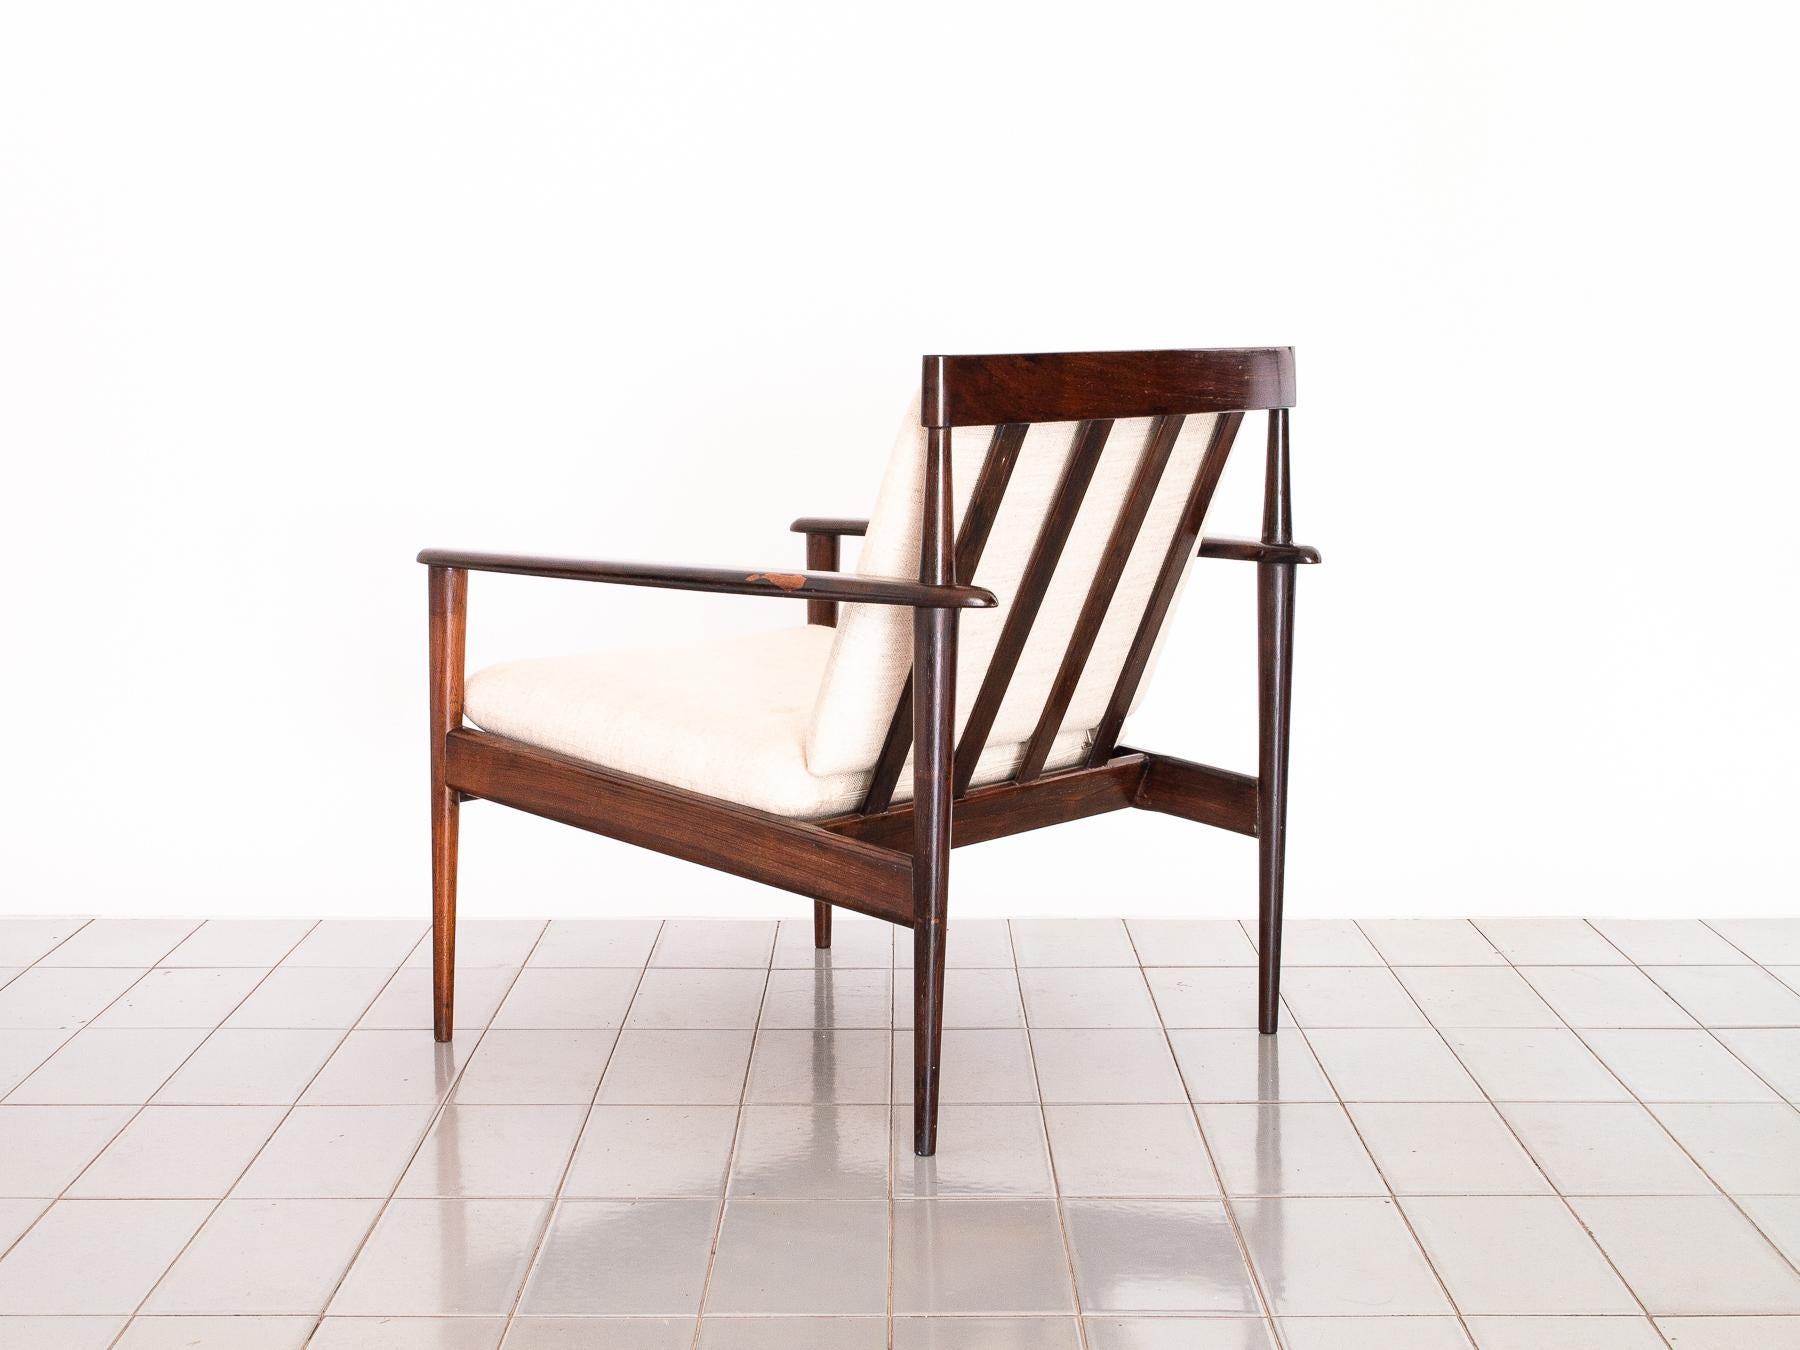 1950s Lounge Chair in Rosewood, Grete Jalk Design, Brazilian Production 1